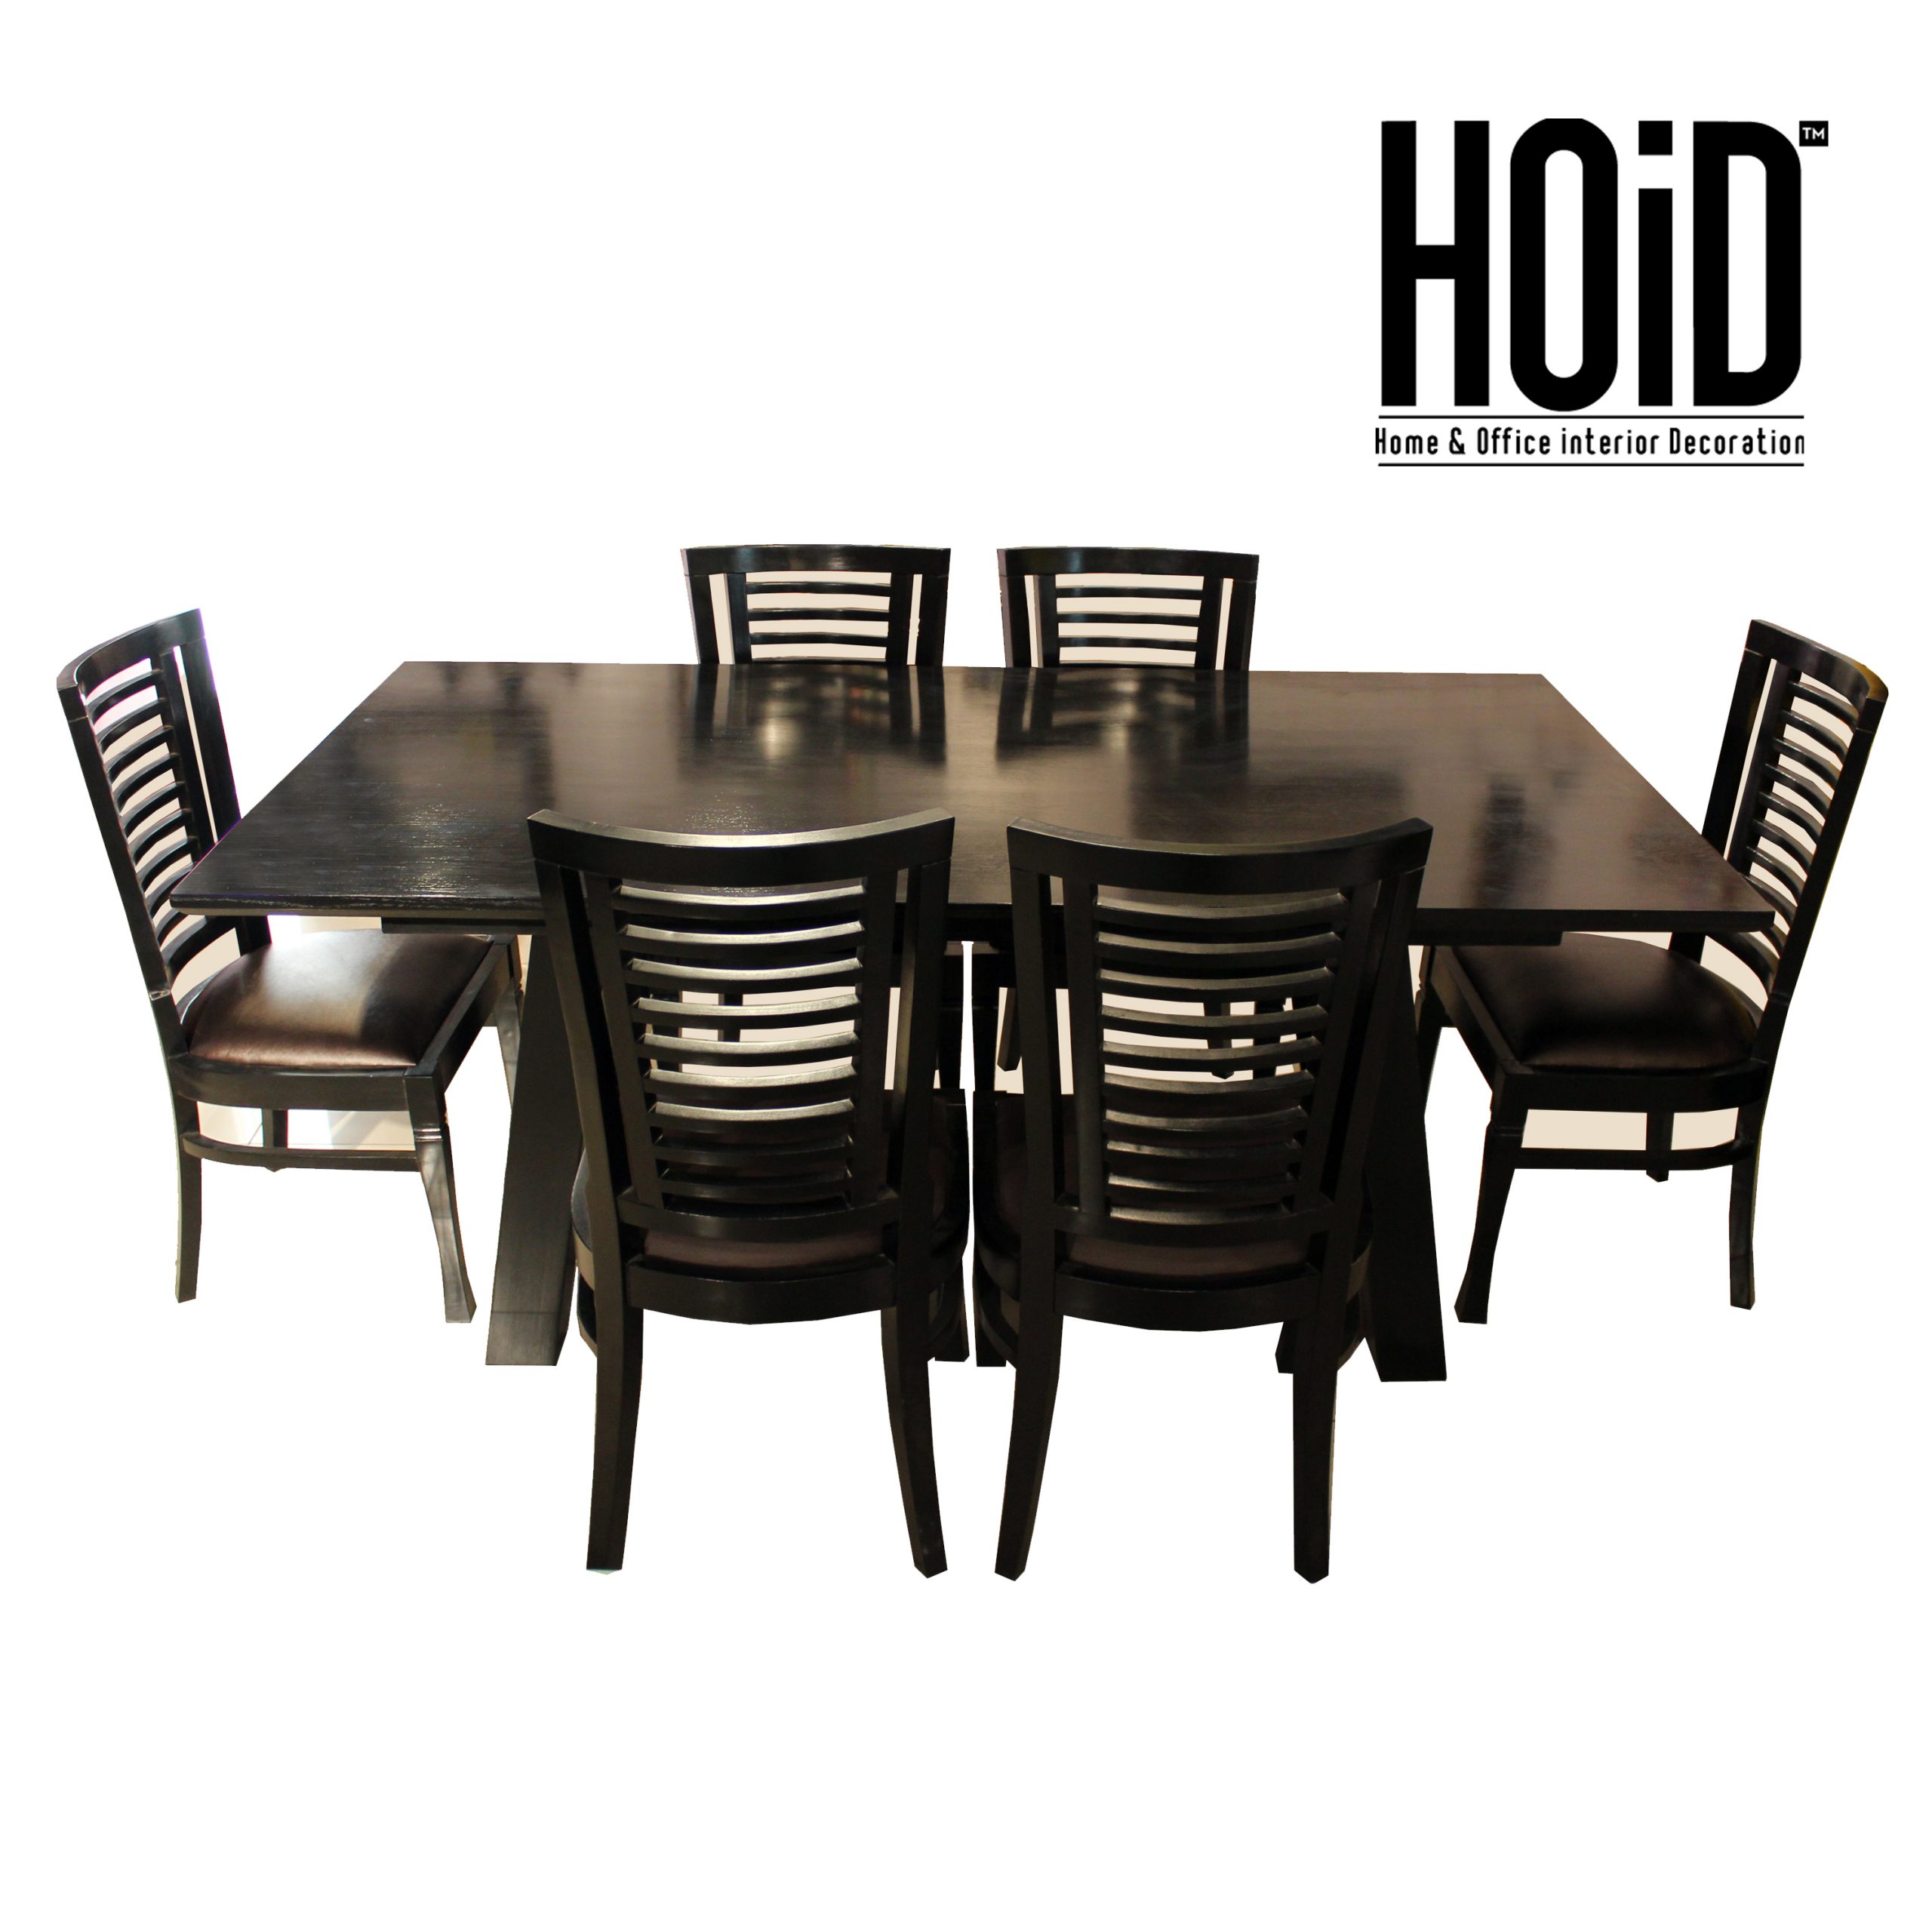 pray-dining-table-with-6-chairs-scaled-2.jpg